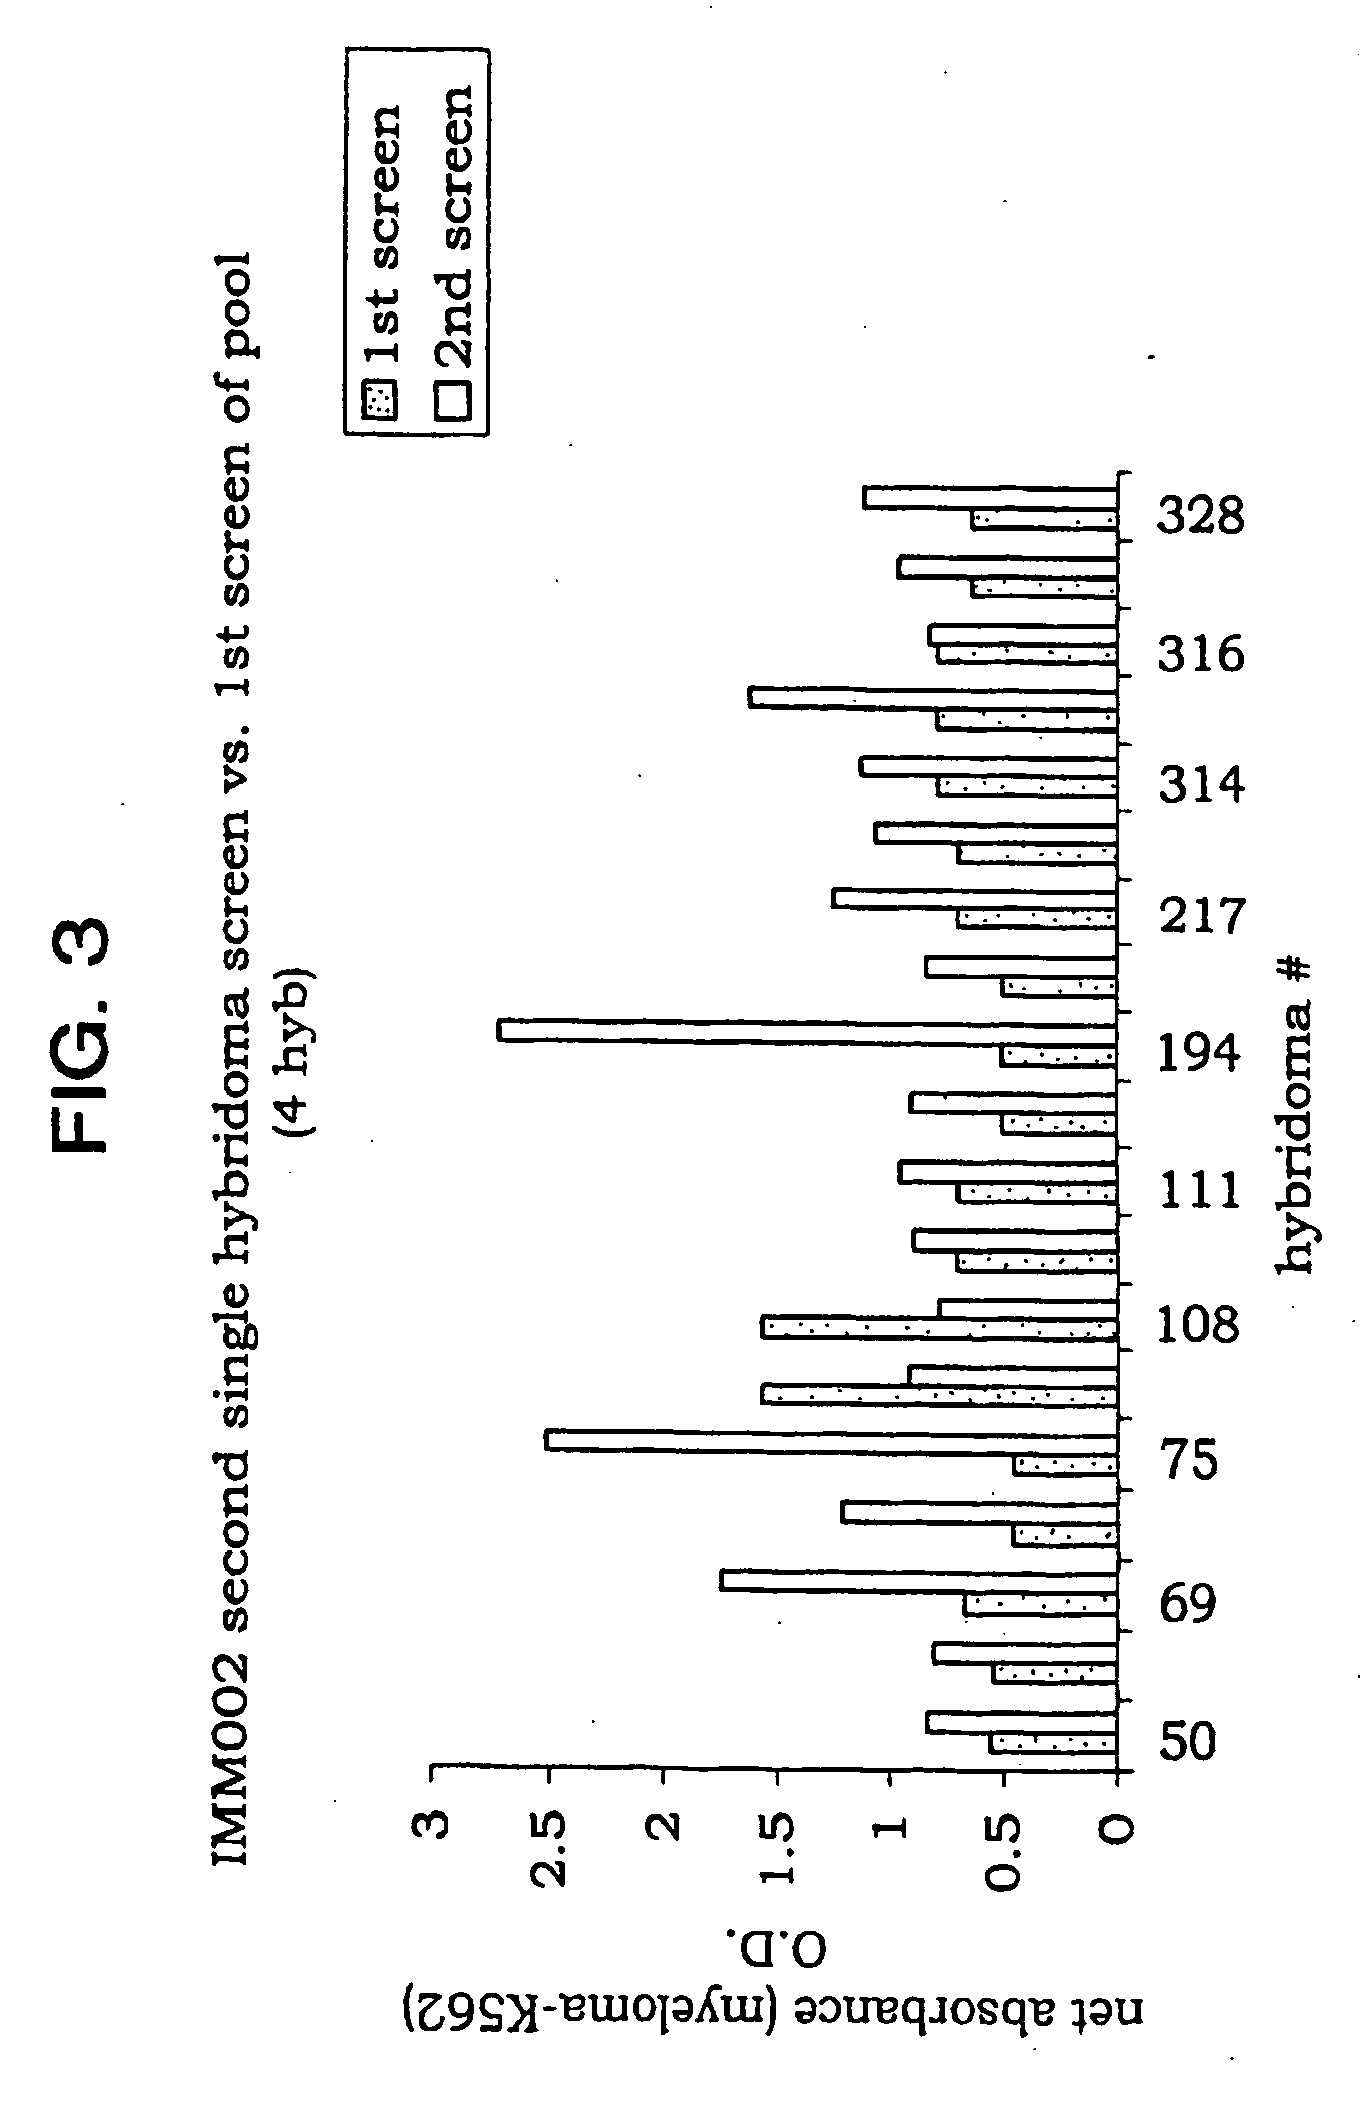 Myeloma cell and ovarian cancer cell surface glycoproteins, antibodies thereto, and uses thereof